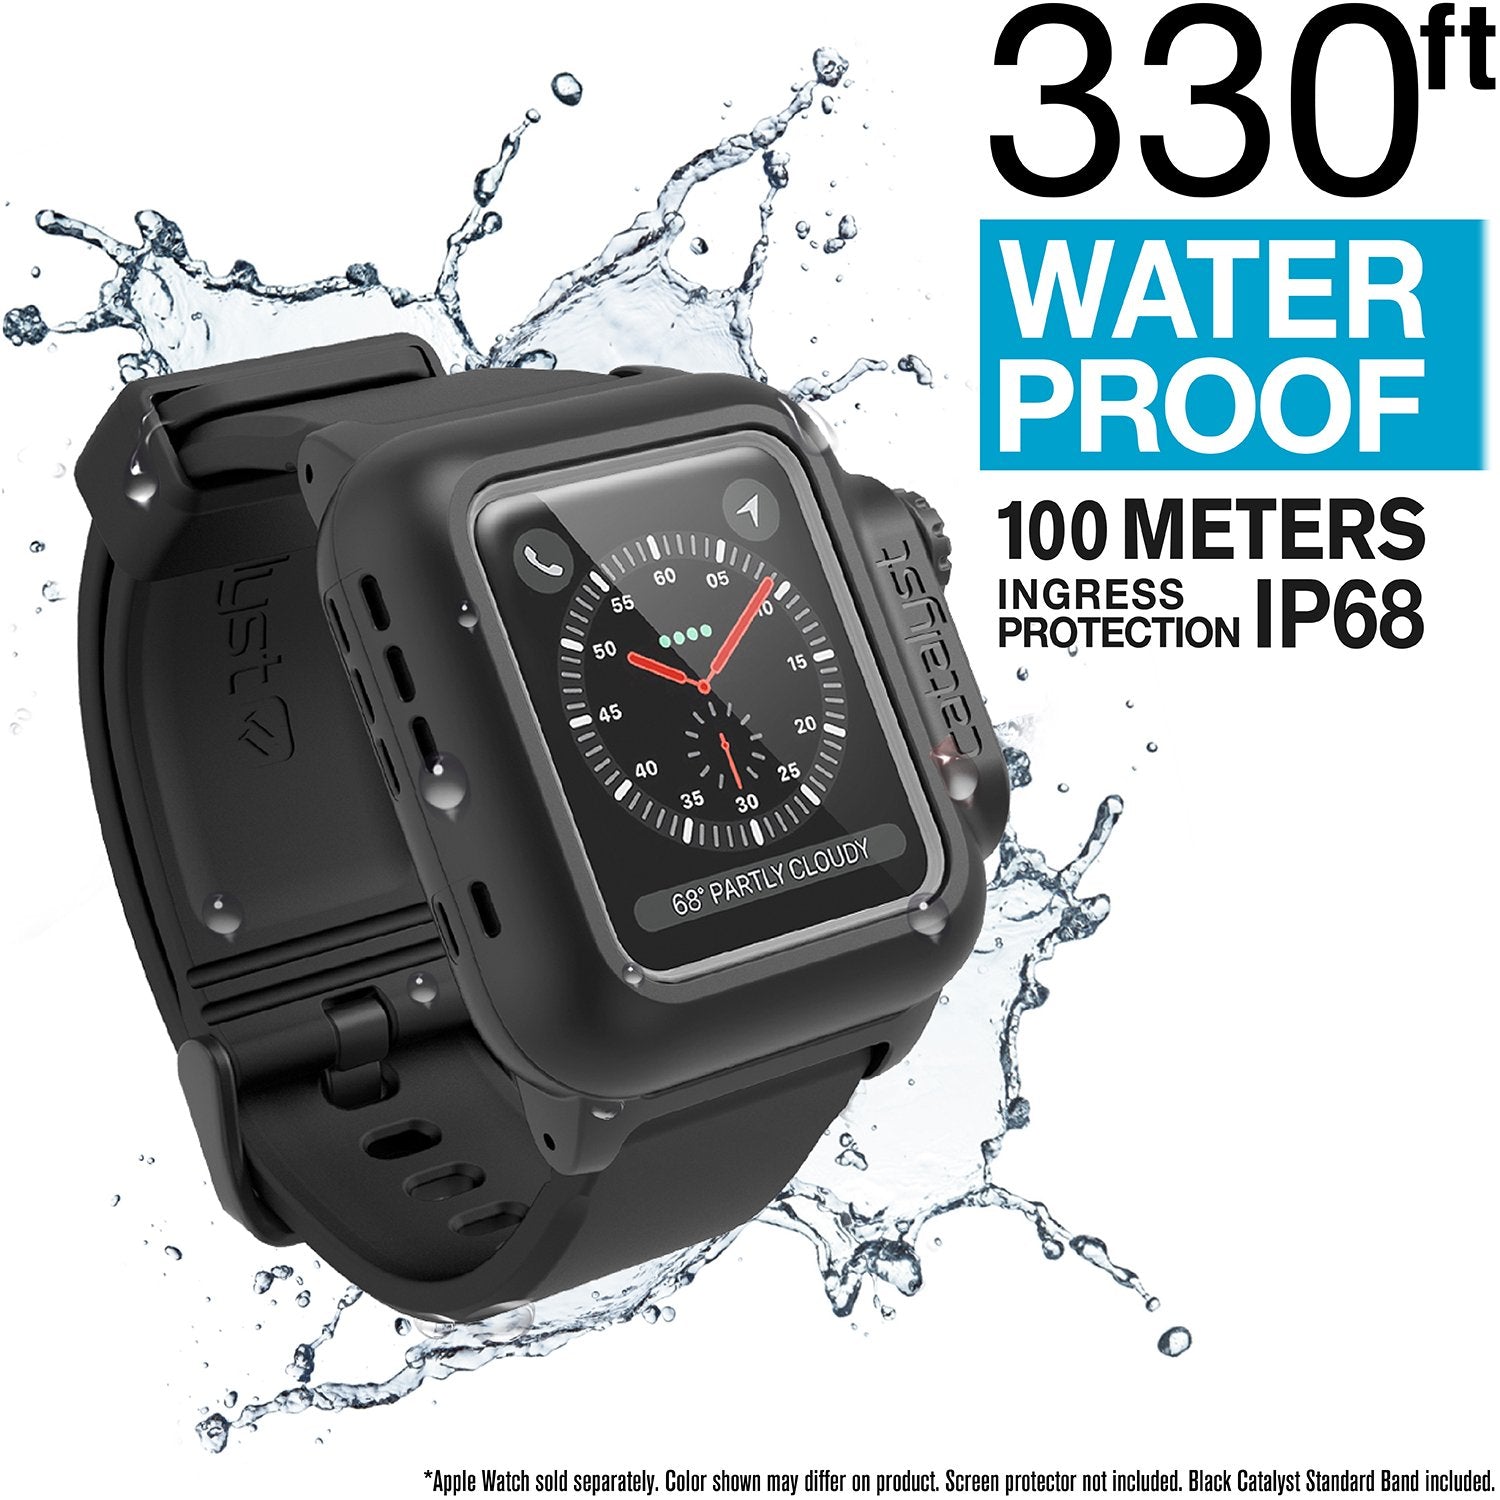 Buy Catalyst Waterproof Case For 38mm Apple Watch Series 3 Catalyst Lifestyle